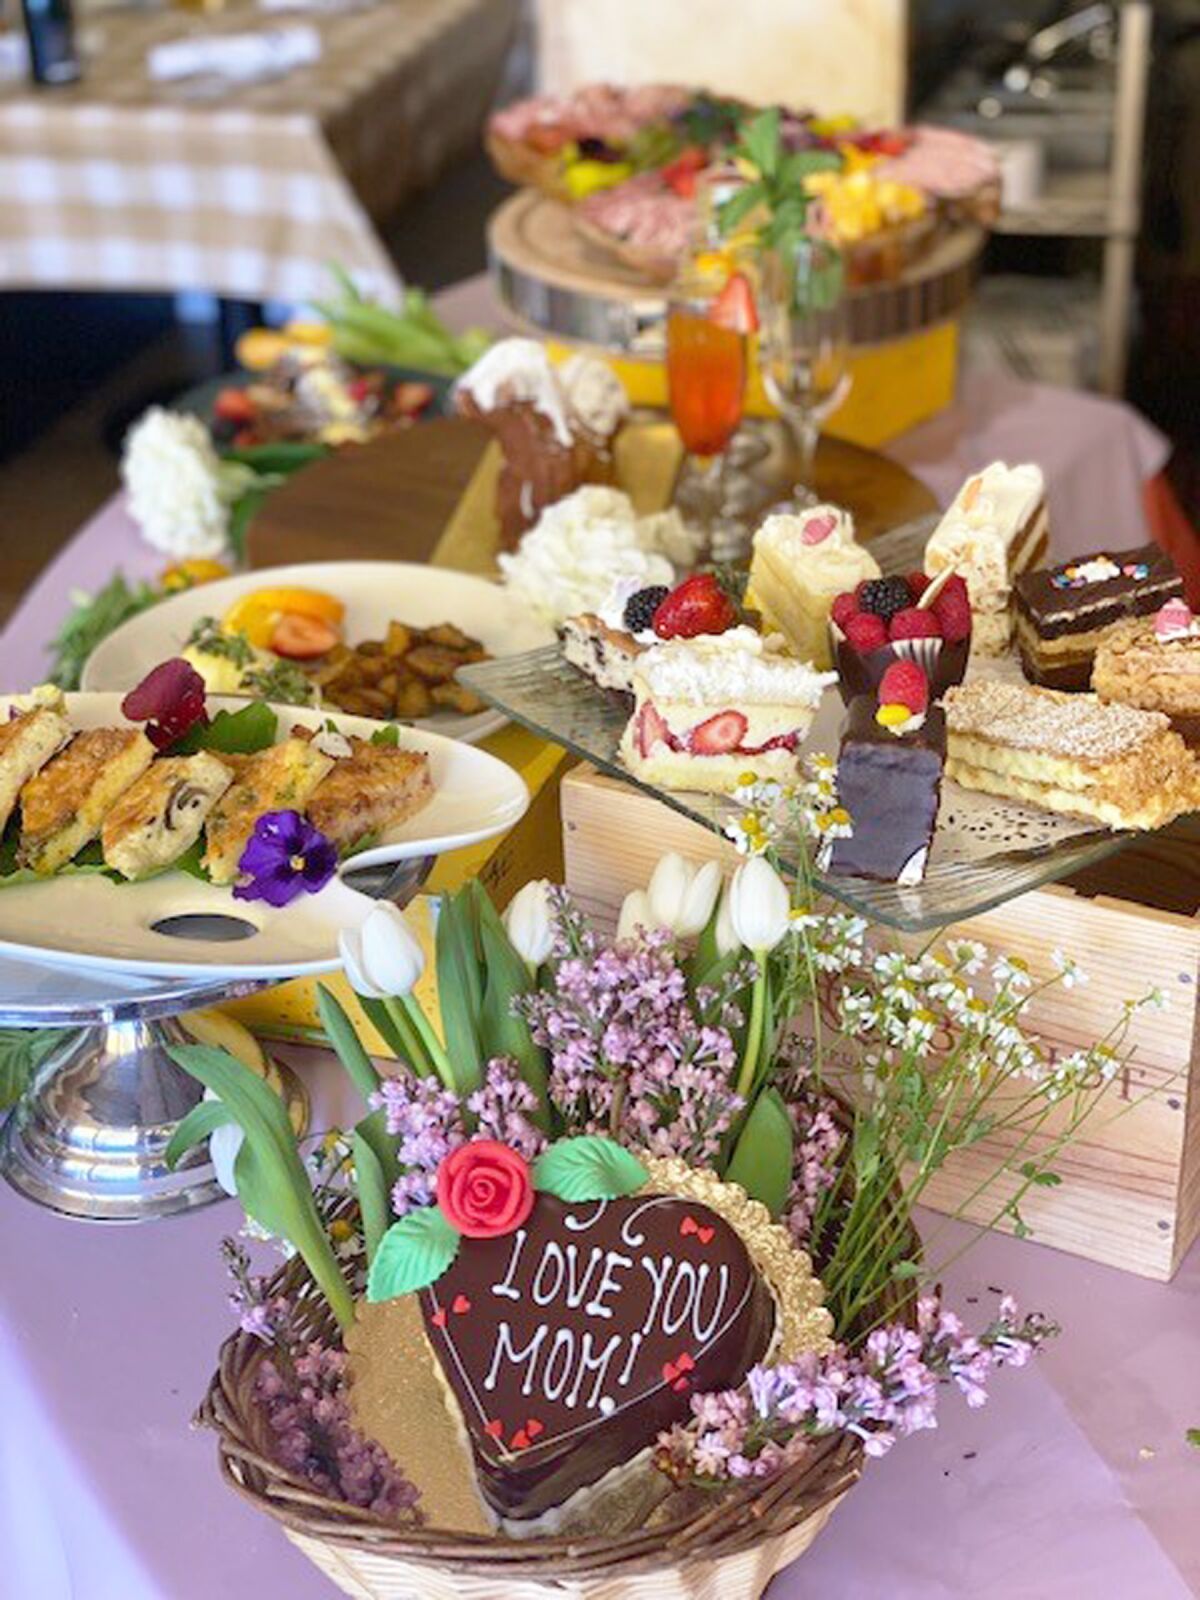 The French Gourmet will offer a wide variety of desserts as part of its special brunch buffet on Mother's Day.